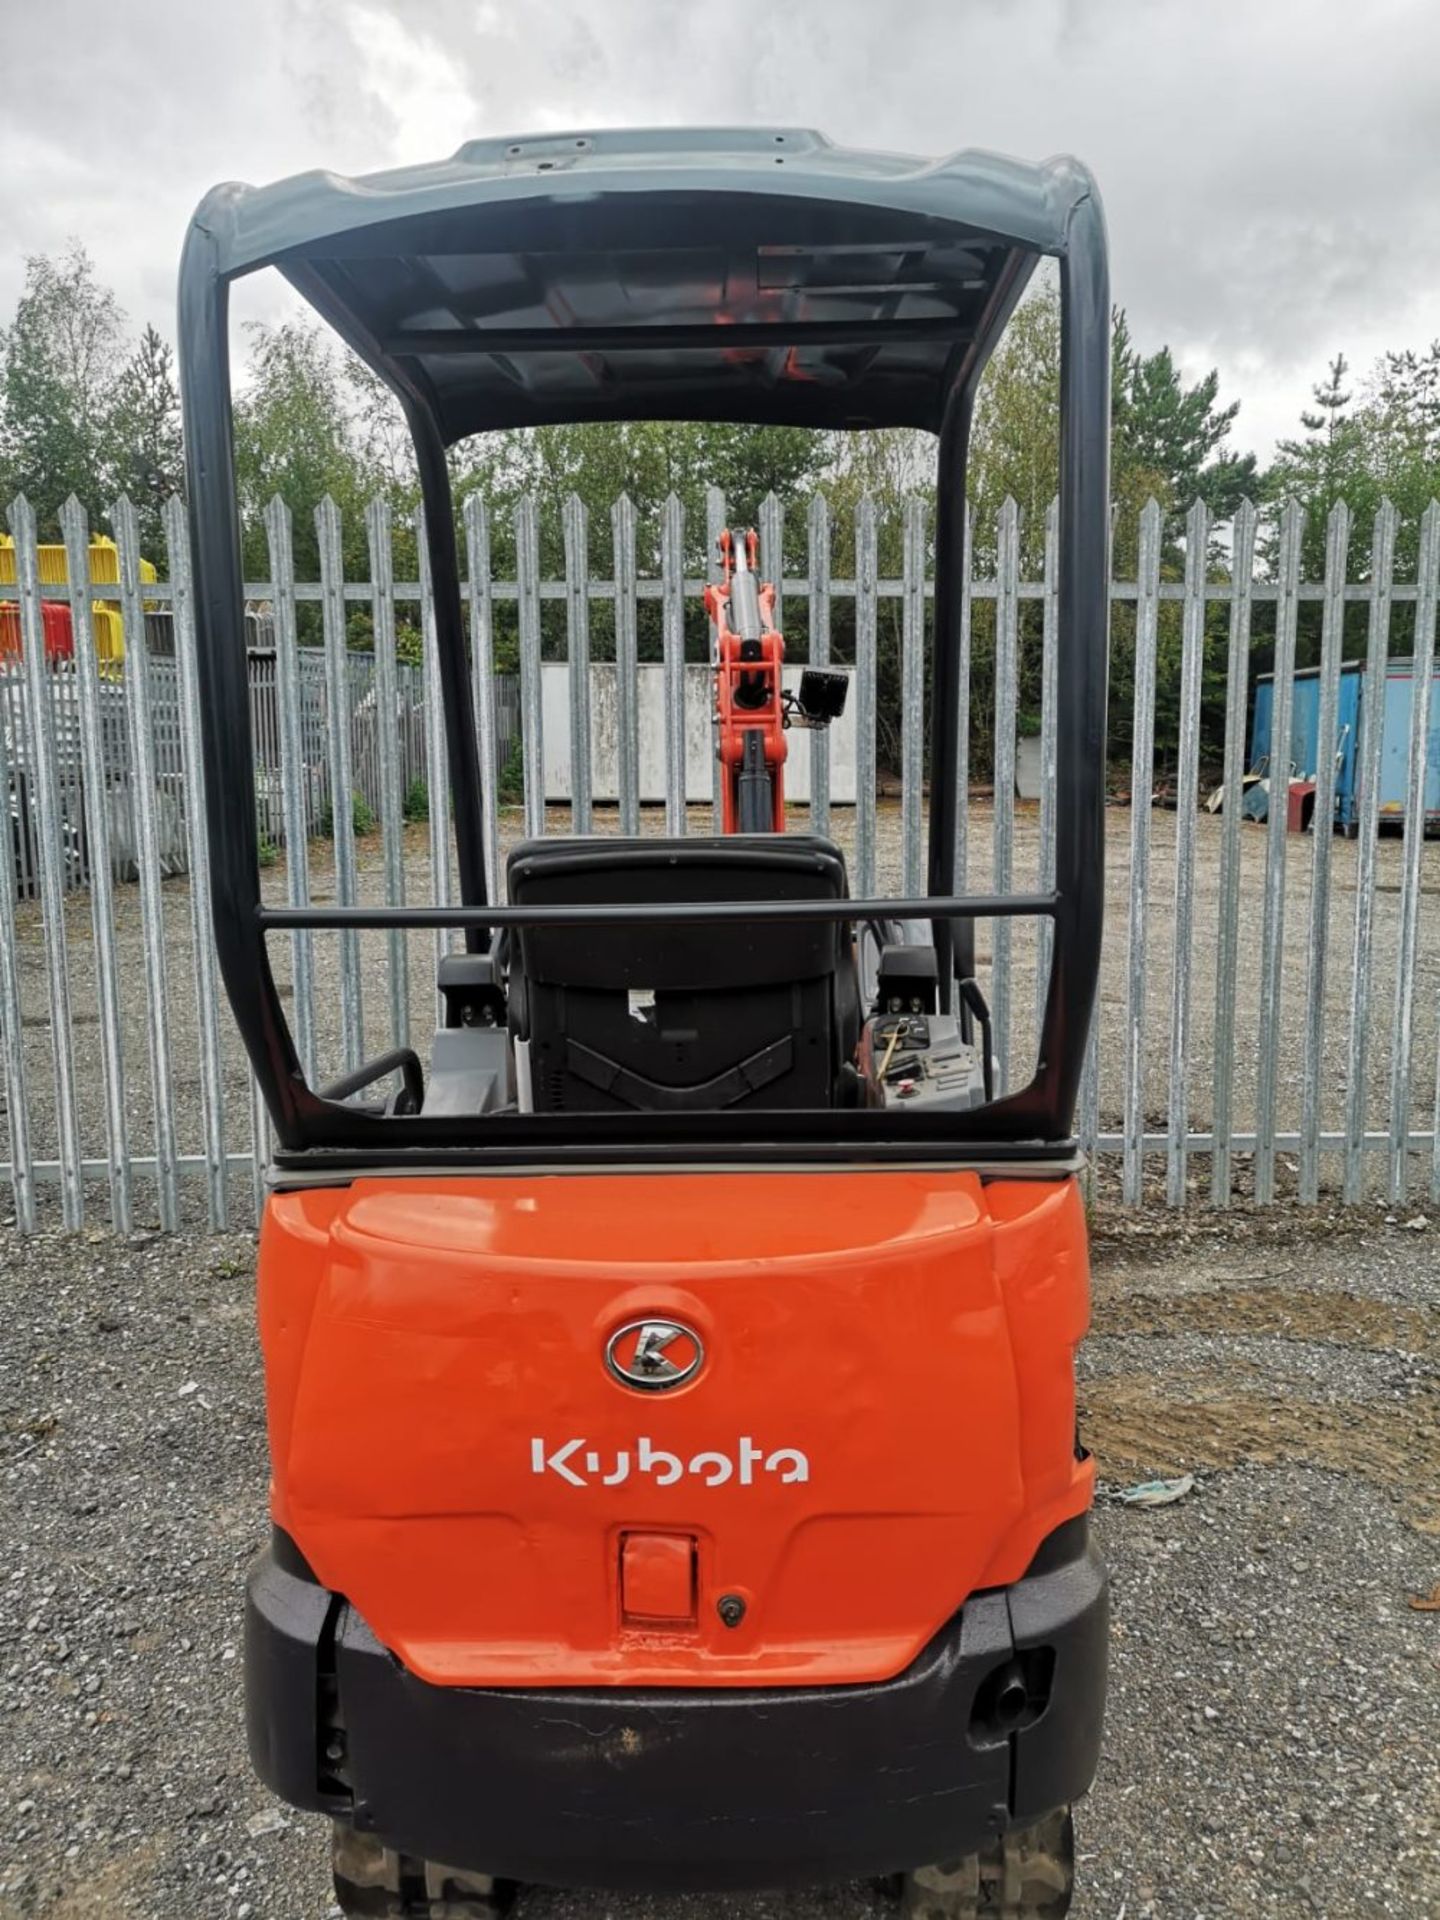 KUBOTA KX016.4 MINIDIGGER C.W 3 BUCKETS, 2015 2178HRS RDD 2 SPEED TRACKING PIPED FOR HAMMER, - Image 4 of 8